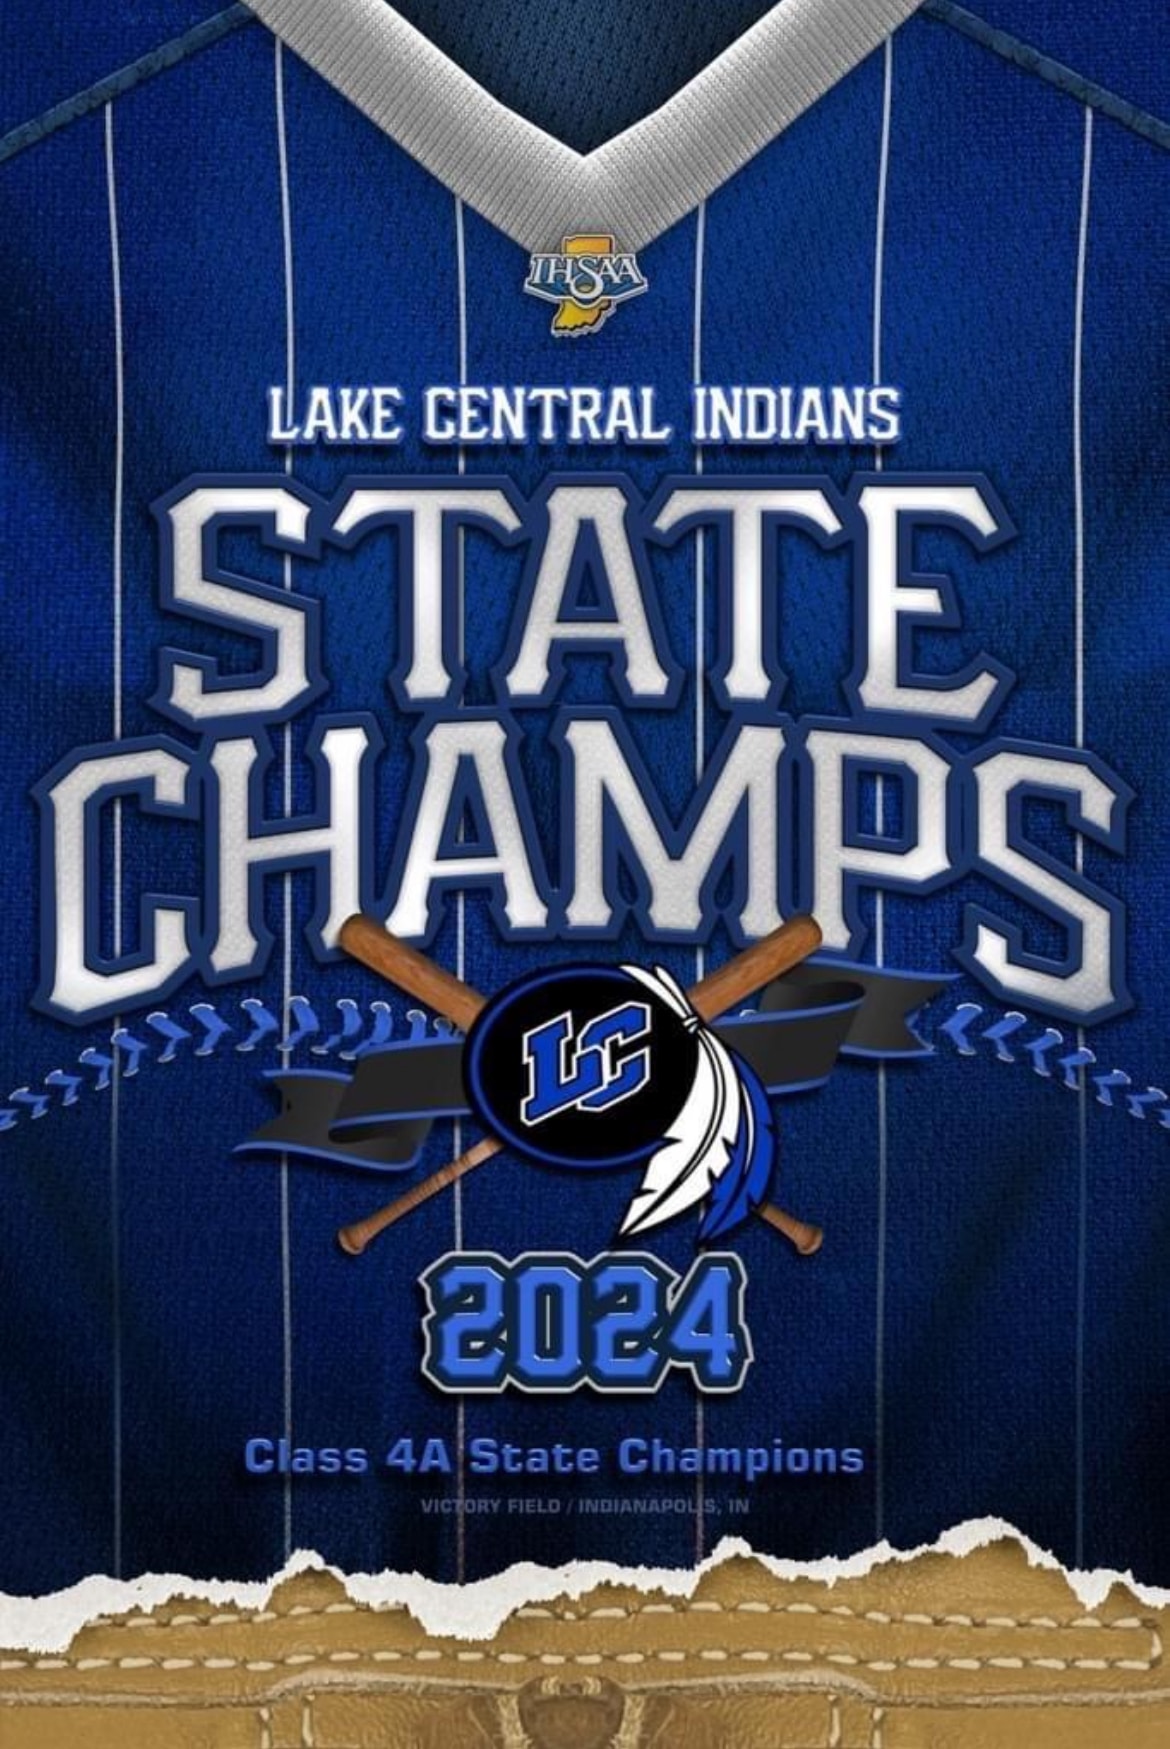 Congratulations to the Lake Central High School Baseball team for winning the 4A State Championship game! The game was the longest in IHSAA history, but the players and coaches persevered through 12 innings to take the state title.